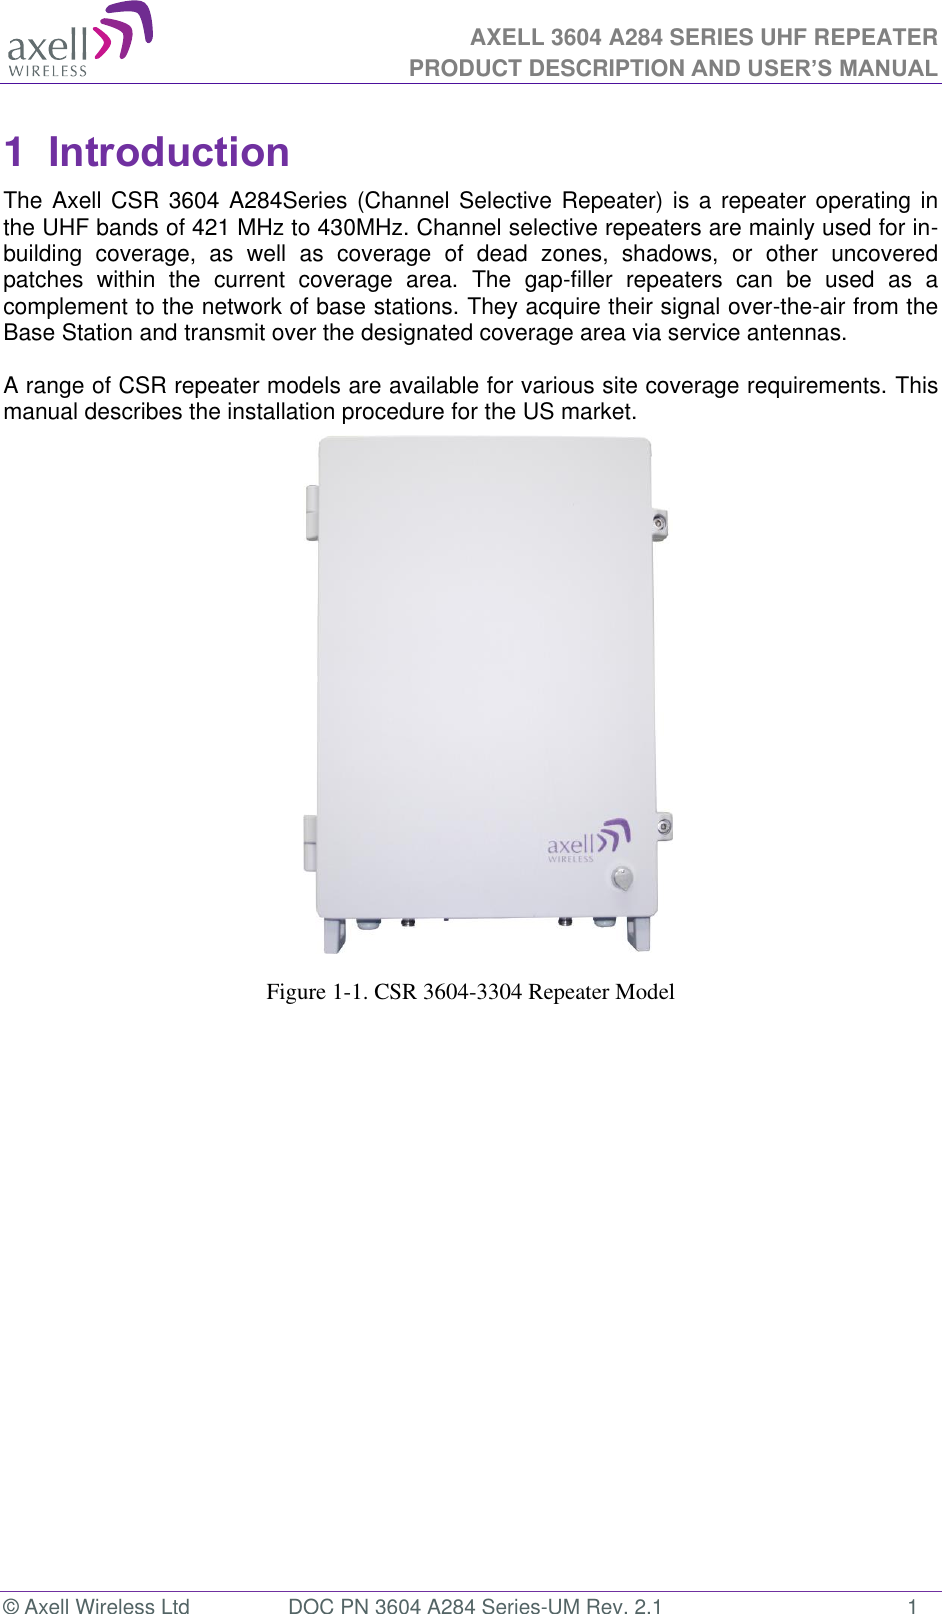 AXELL 3604 A284 SERIES UHF REPEATER PRODUCT DESCRIPTION AND USER’S MANUAL  © Axell Wireless Ltd  DOC PN 3604 A284 Series-UM Rev. 2.1  1 1  Introduction  The Axell CSR 3604 A284Series (Channel Selective Repeater) is a repeater operating in the UHF bands of 421 MHz to 430MHz. Channel selective repeaters are mainly used for in-building  coverage,  as  well  as  coverage  of  dead  zones,  shadows,  or  other  uncovered patches  within  the  current  coverage  area.  The  gap-filler  repeaters  can  be  used  as  a complement to the network of base stations. They acquire their signal over-the-air from the Base Station and transmit over the designated coverage area via service antennas.   A range of CSR repeater models are available for various site coverage requirements. This manual describes the installation procedure for the US market.                      Figure 1-1. CSR 3604-3304 Repeater Model 